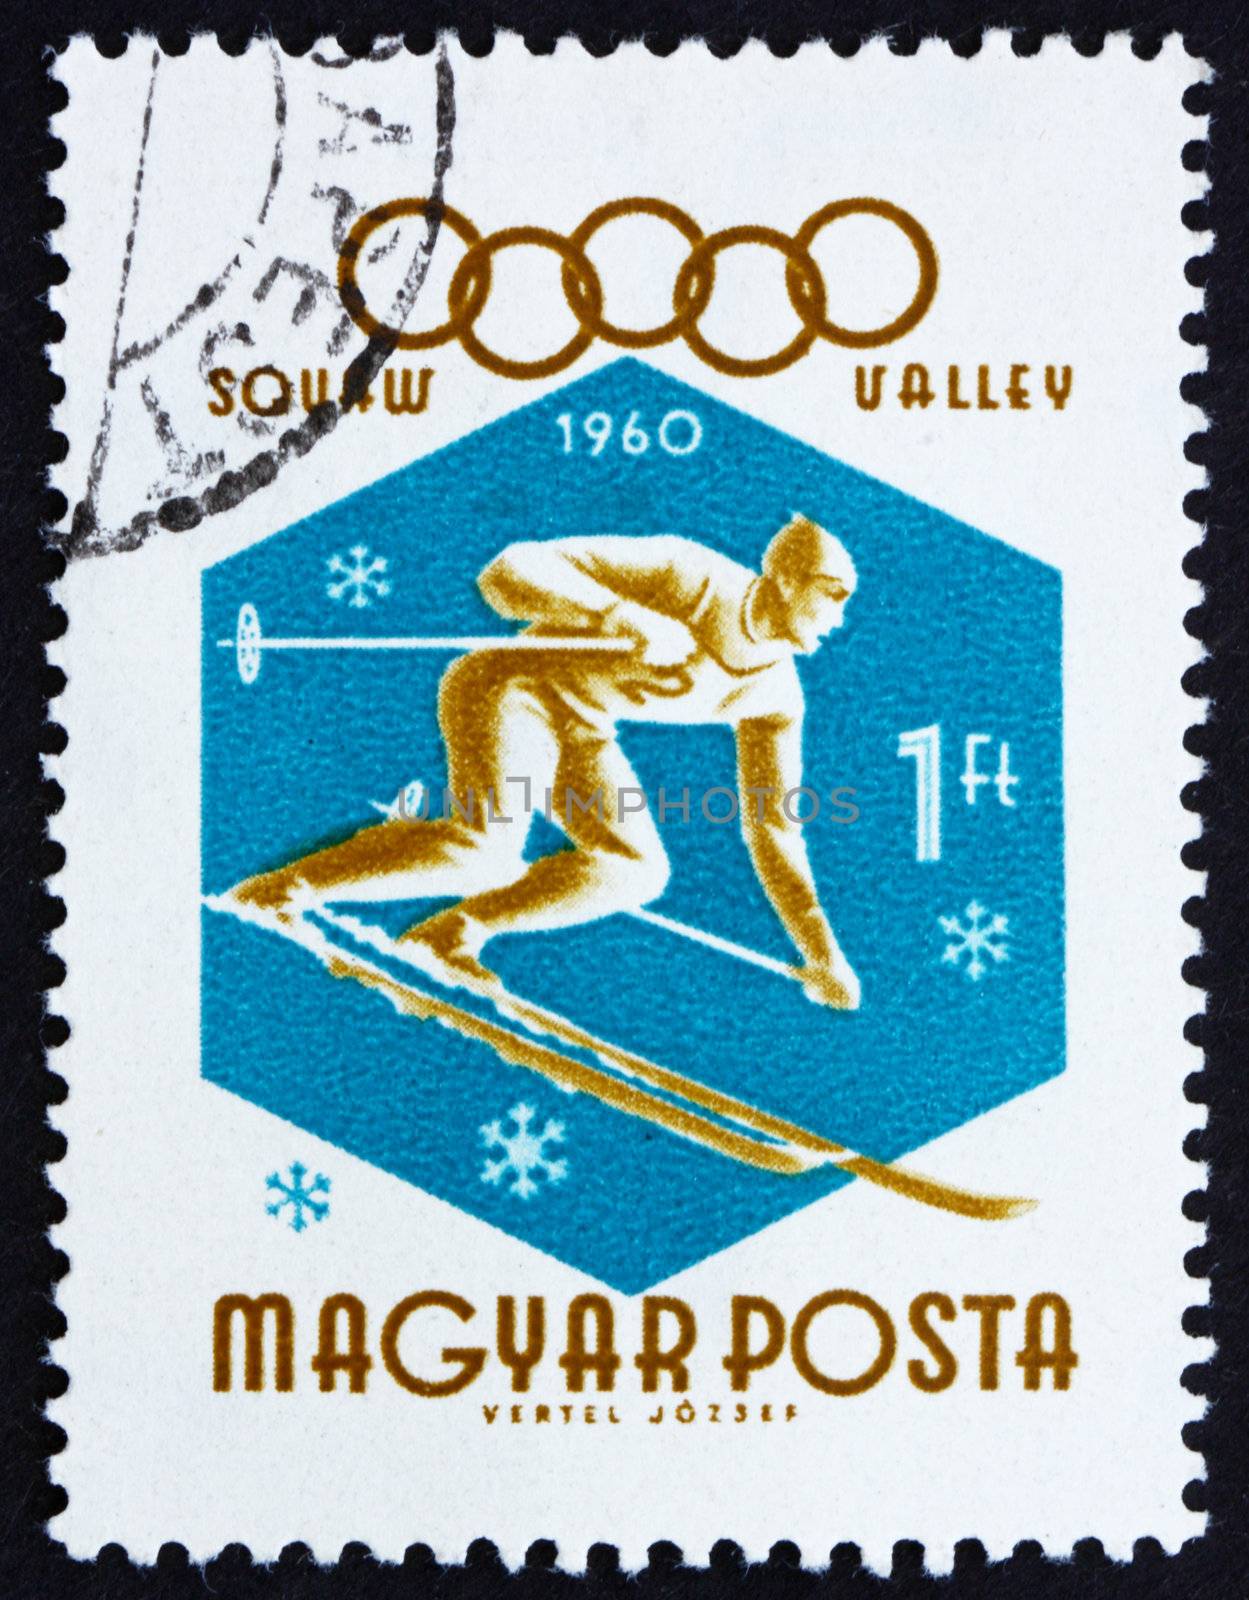 HUNGARY - CIRCA 1960: a stamp printed in the Hungary shows Downhill Skier, Winter Olympic sports, Squaw Valley 60, circa 1960